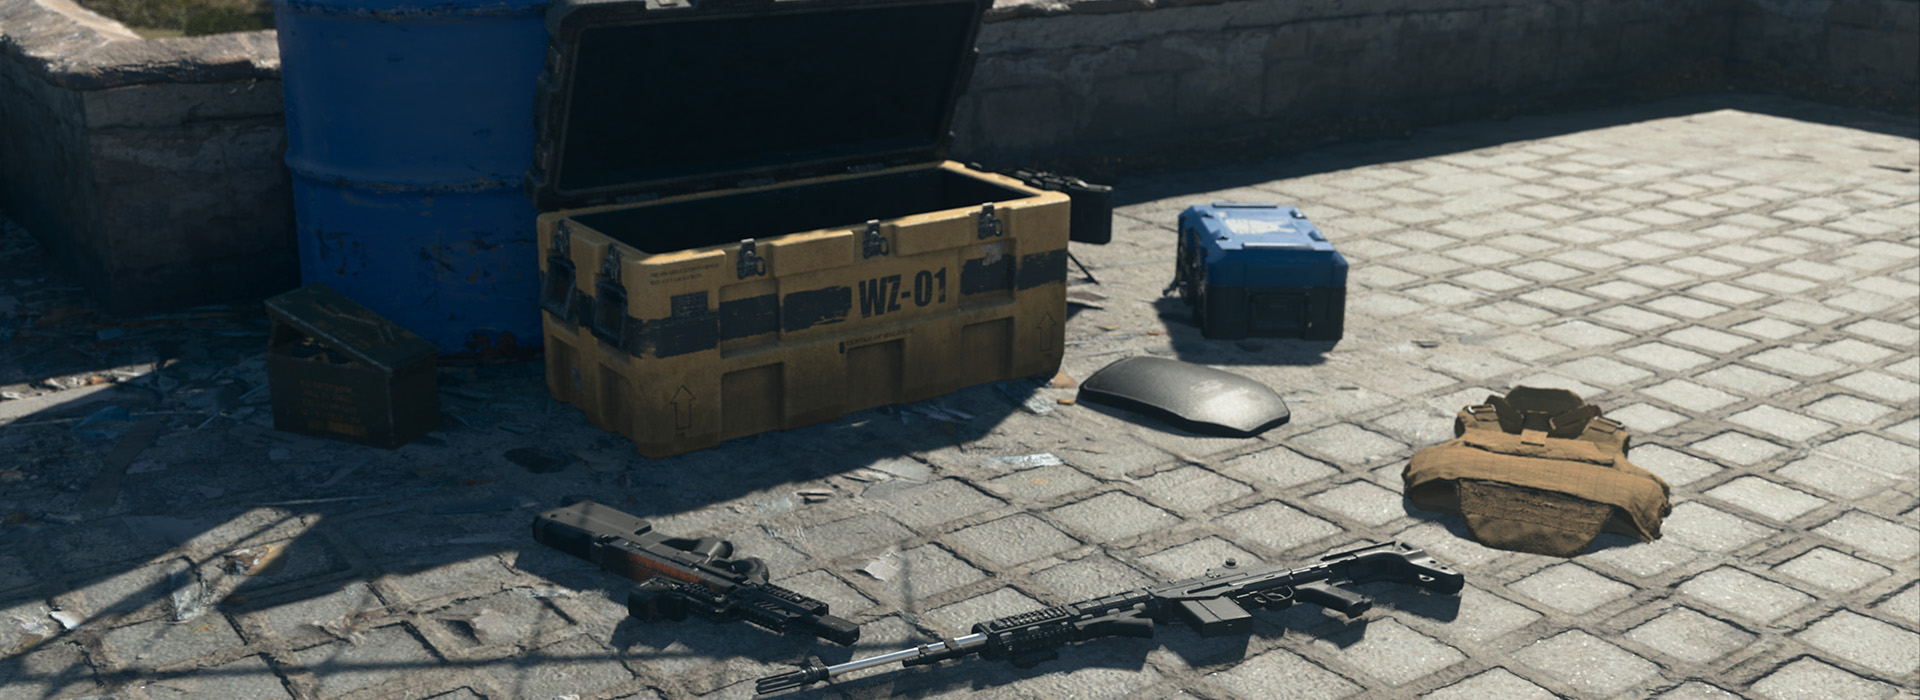 Buncha sweet loot on the ground in front of a Supply Box